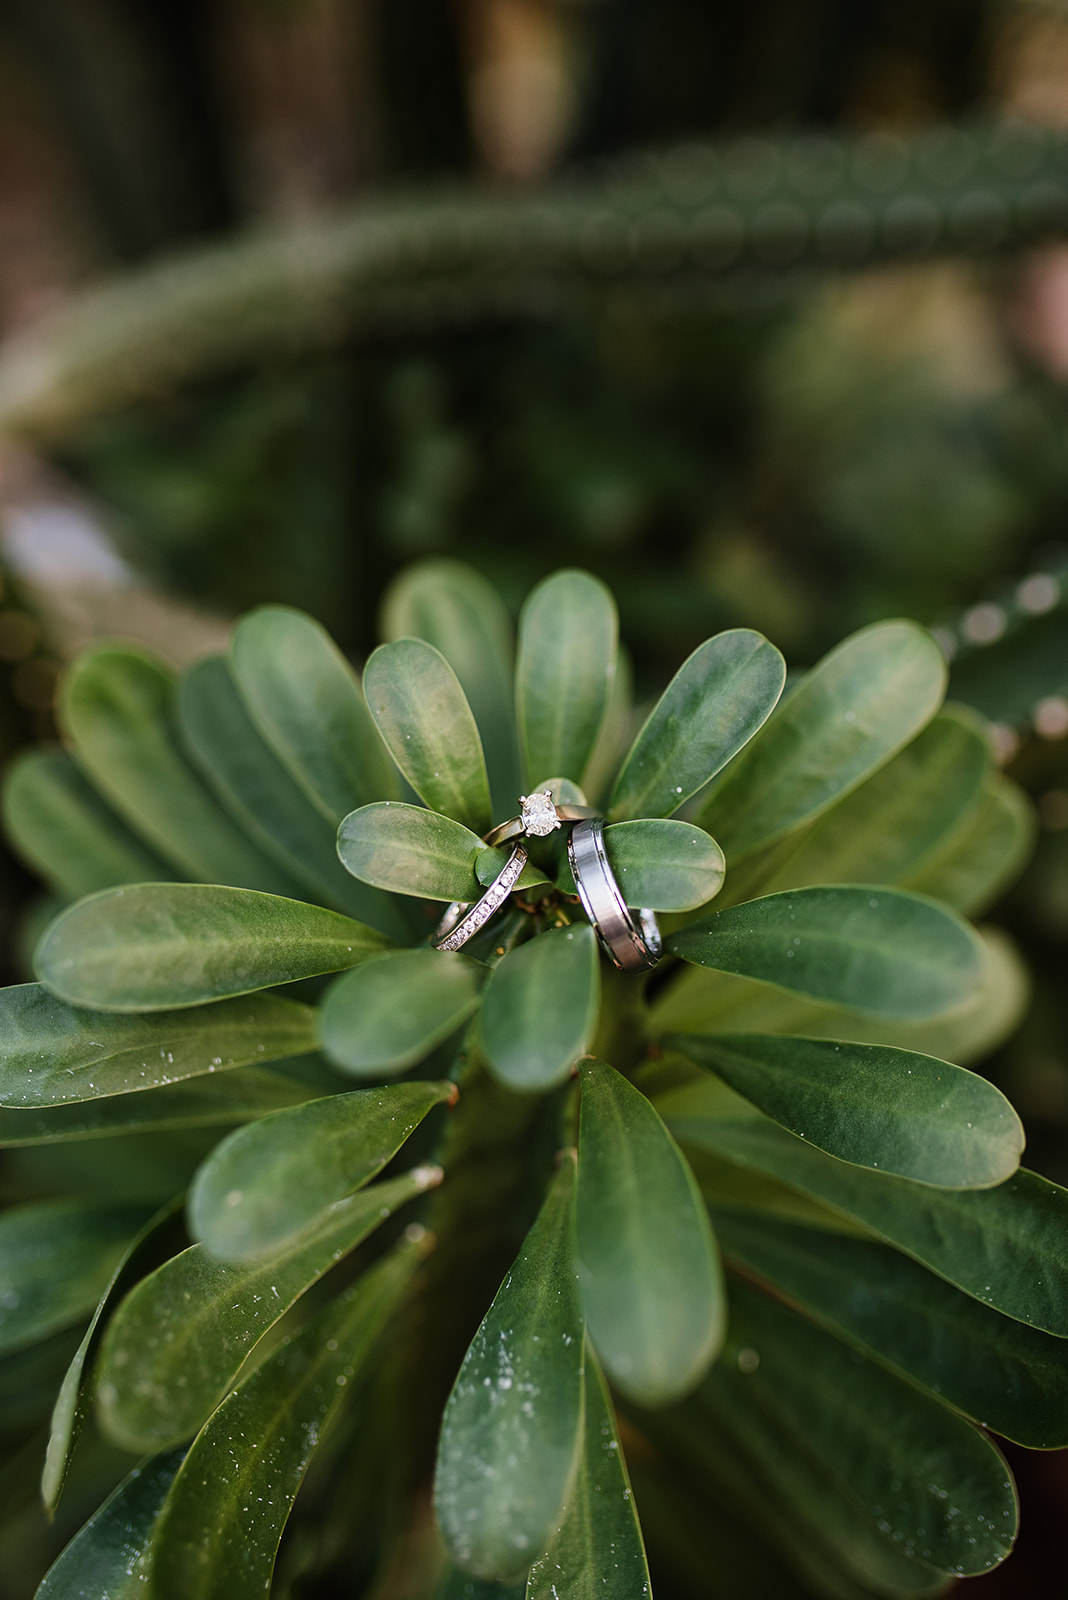 Wedding and engagement rings sit together on a green leafy plant